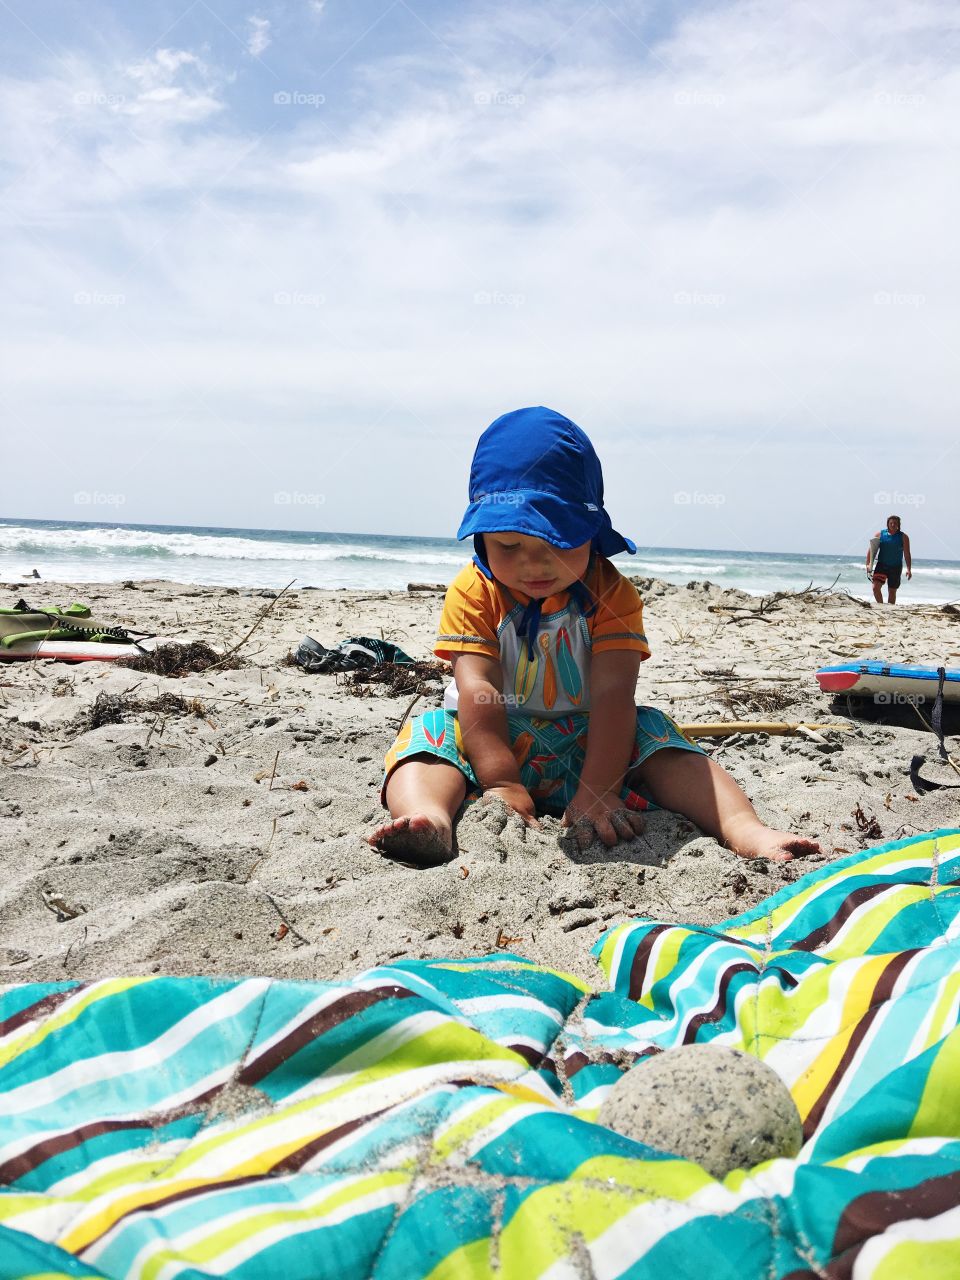 This photo captures an adorable baby playing in the sand of a California beach on a warm summer day.